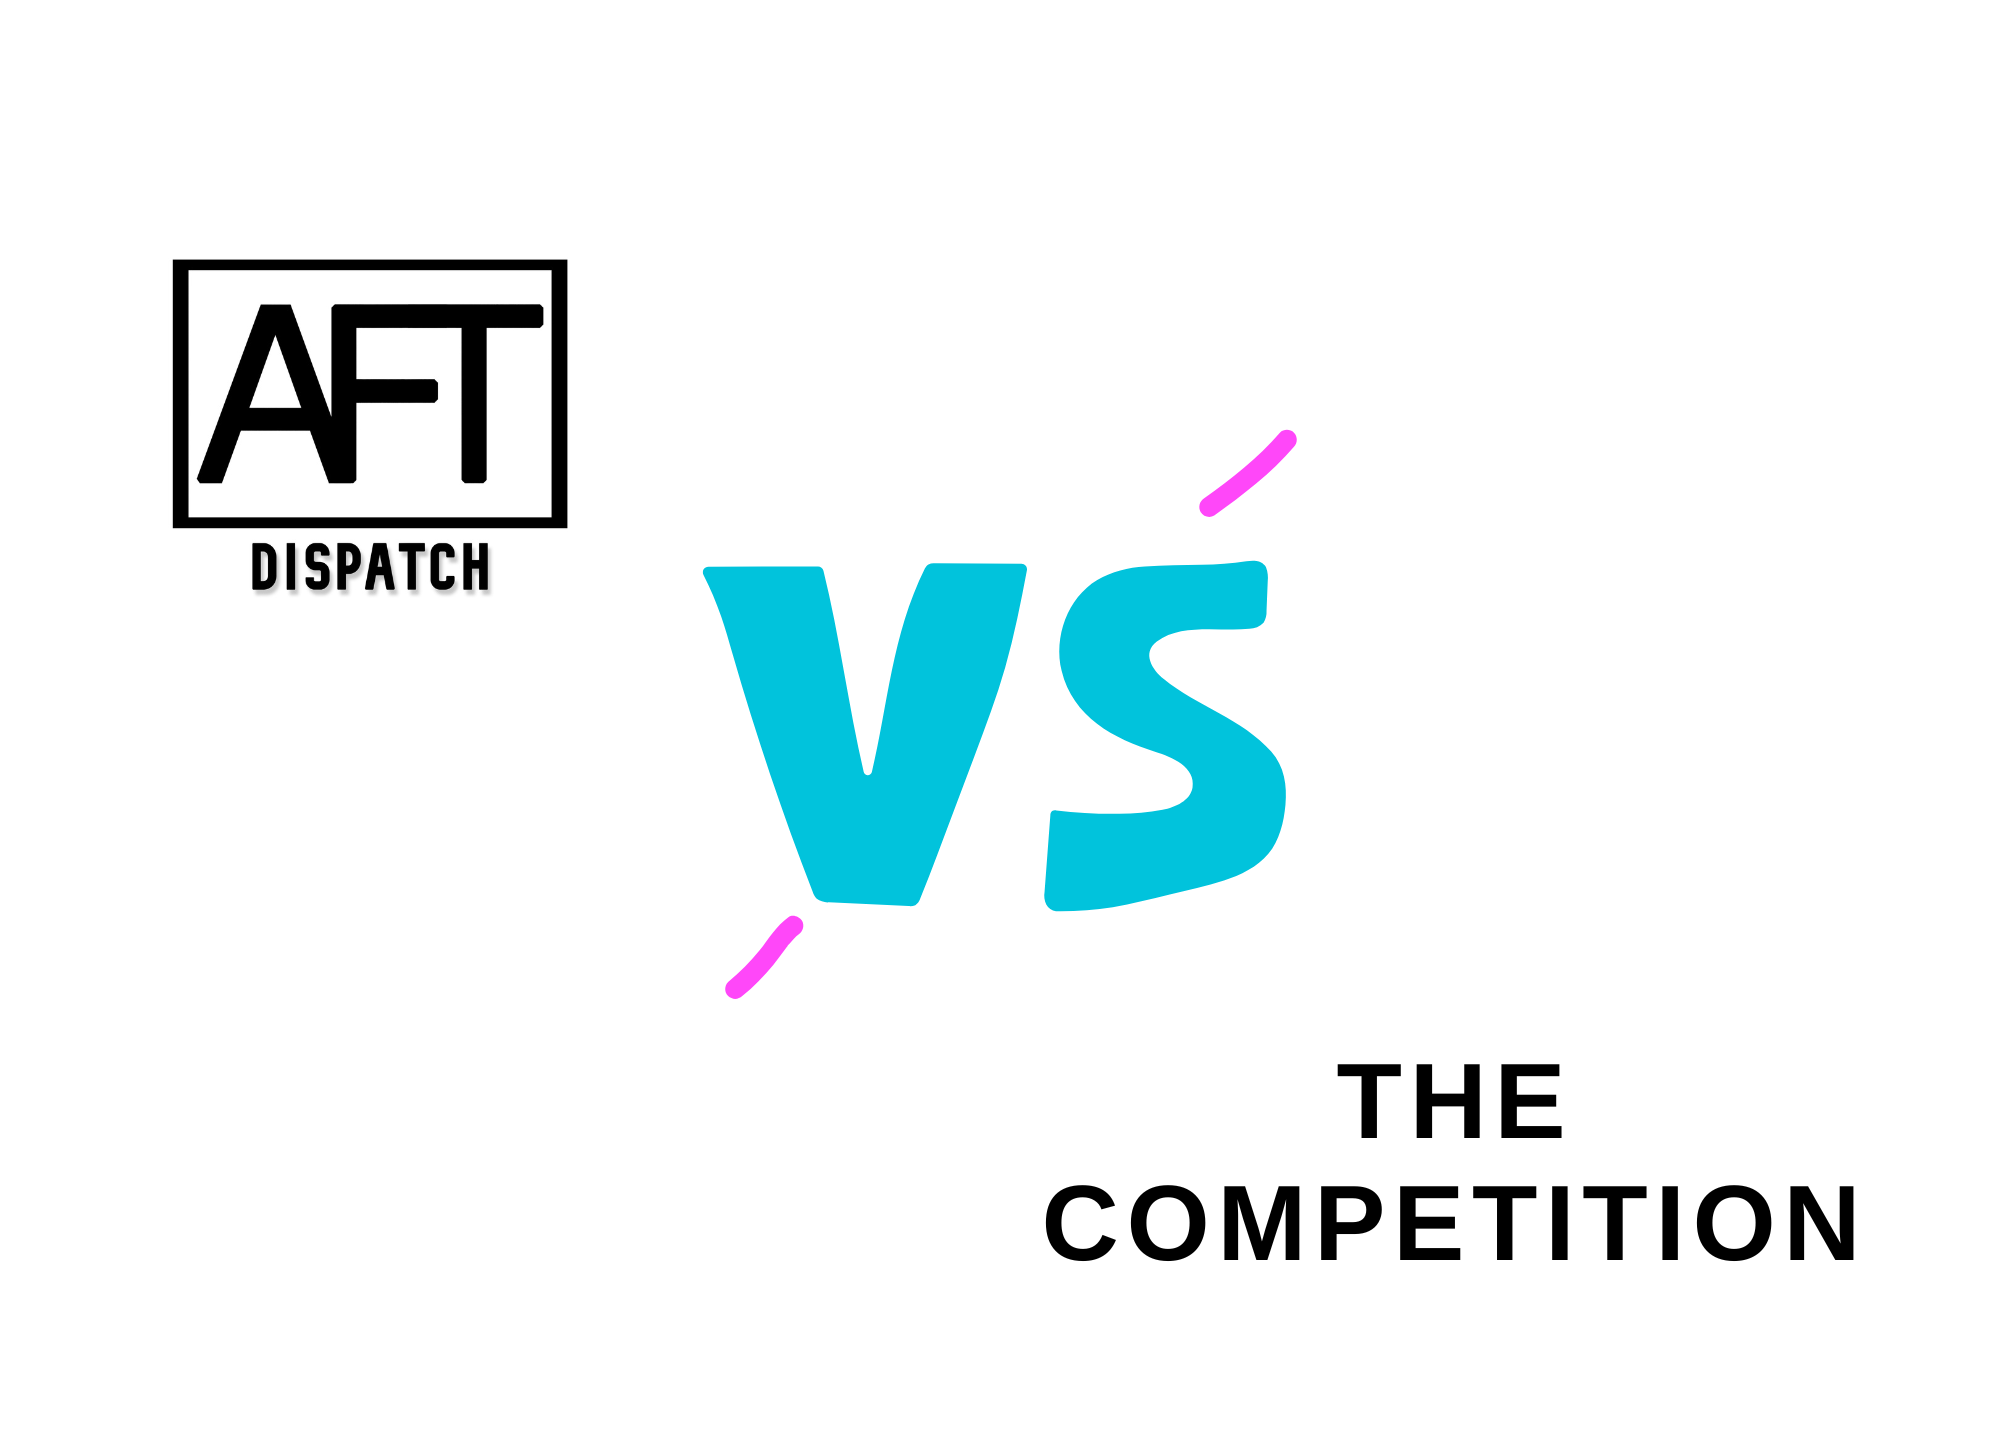 AFT Dispatch vs The Competition